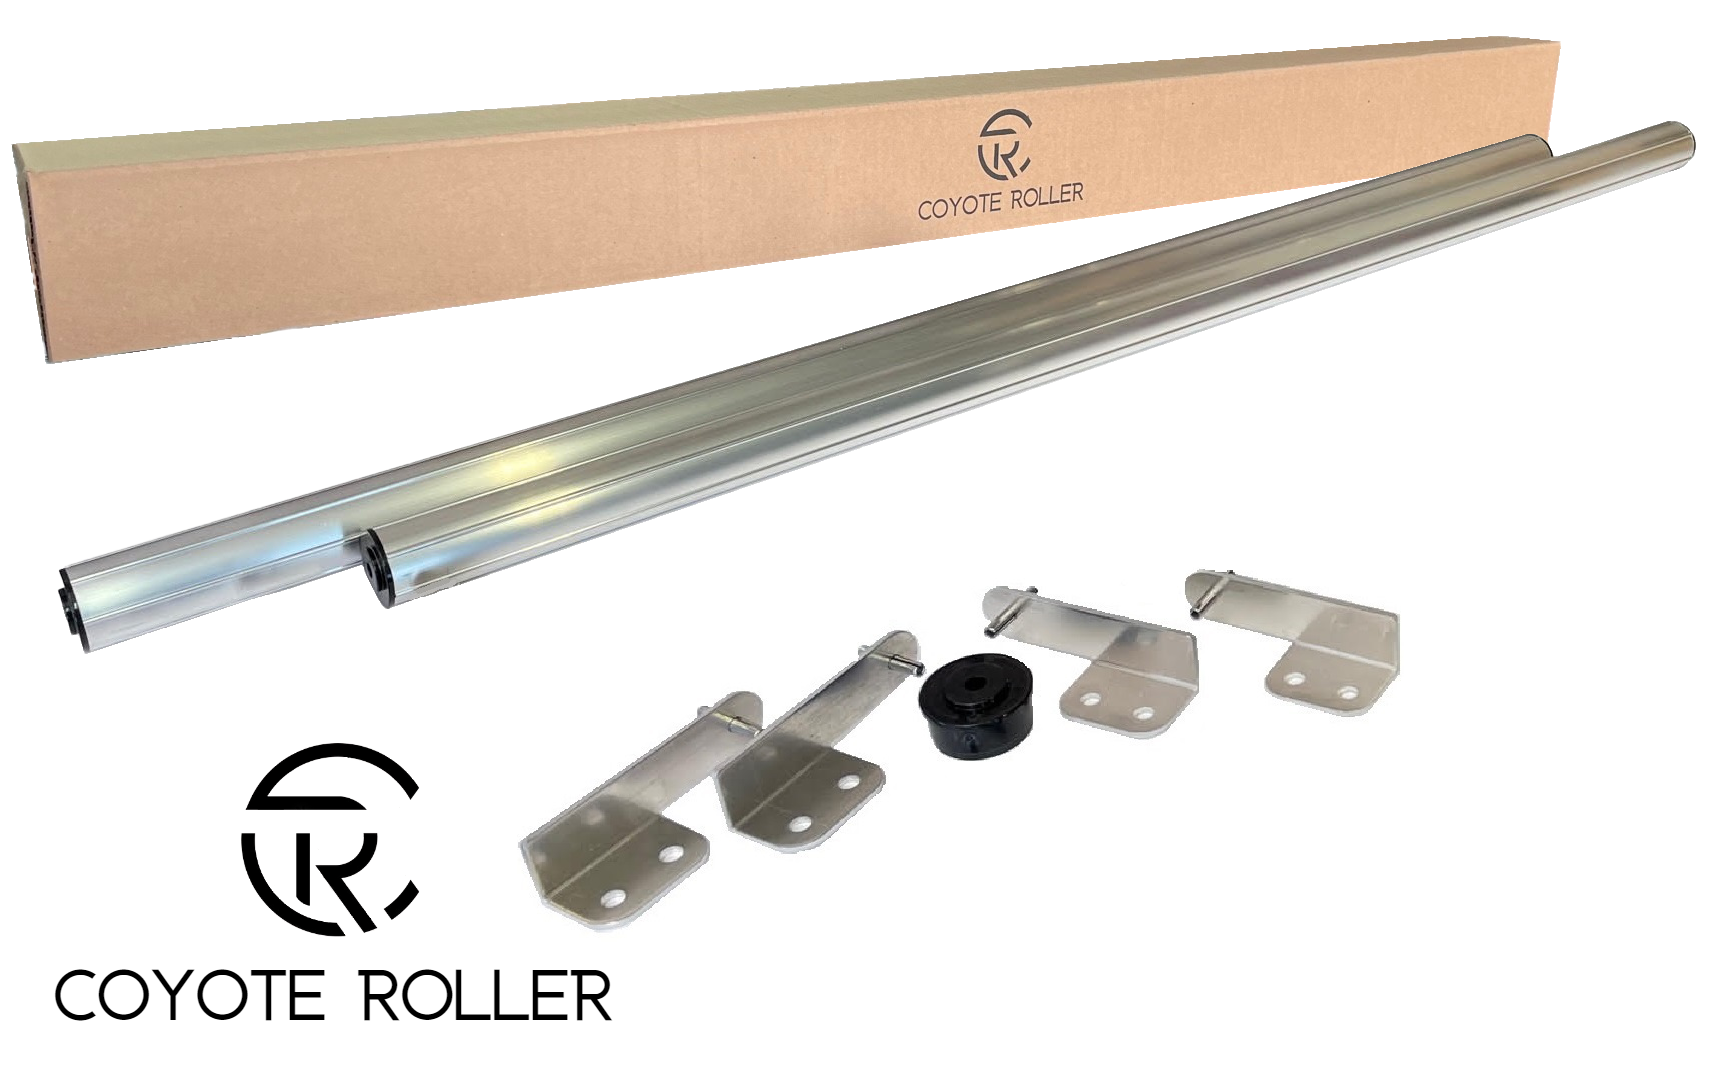 28 Foot Fence Coyote Roller Kit- <br> 7 Rollers, 9 Brackets, 2 End Caps